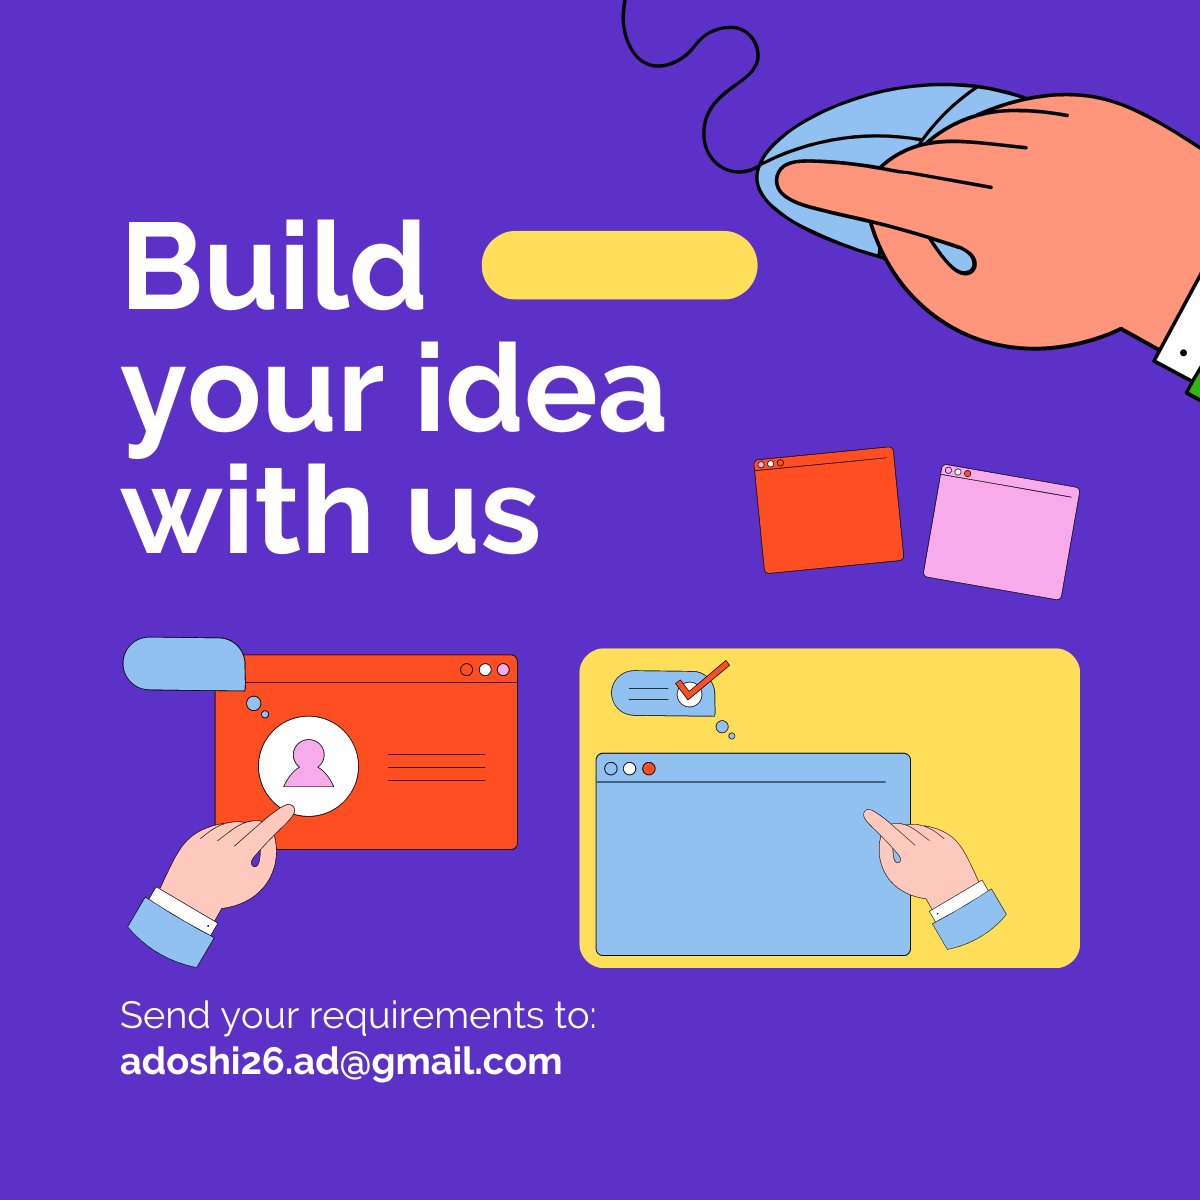 🚀 New Ventures Await! 👋 

Excited for app, web, or design projects. 

Portfolio: abhishekdoshi.dev 🌟

Let's talk! 🌈 

DM or email adoshi26.ad@gmail.com. 

Ready for the next big thing! 🚀🌟 

#NewVenture #TechCollaboration #AppDev #WebDesign #Flutter #Community